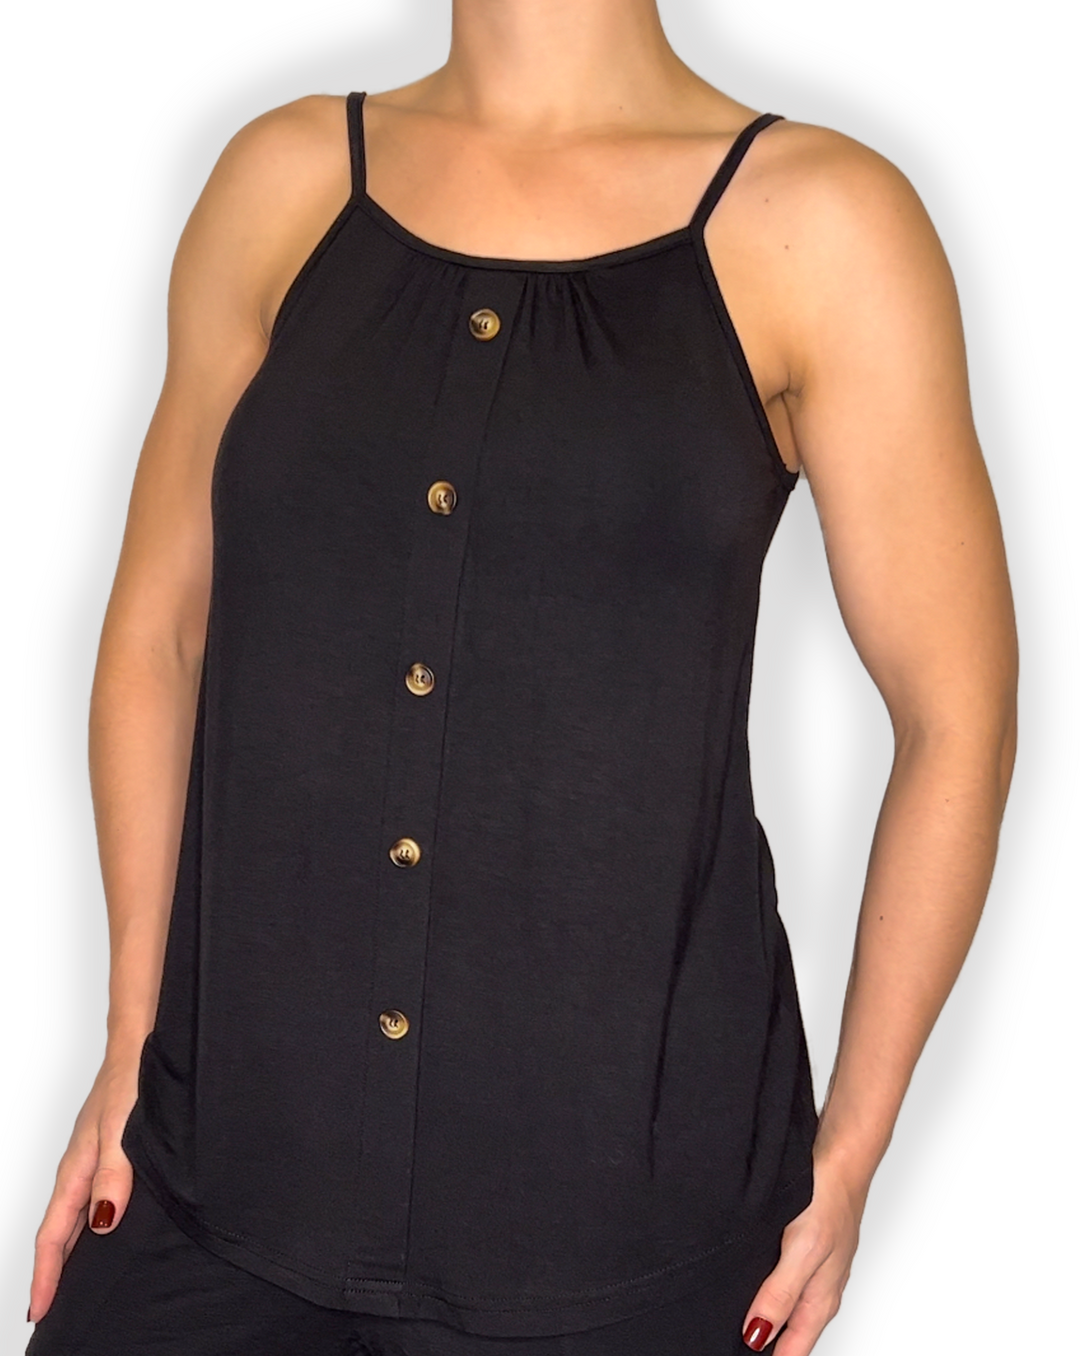 Stylish and comfortable AMY Braless Tank Top with Spaghetti Straps